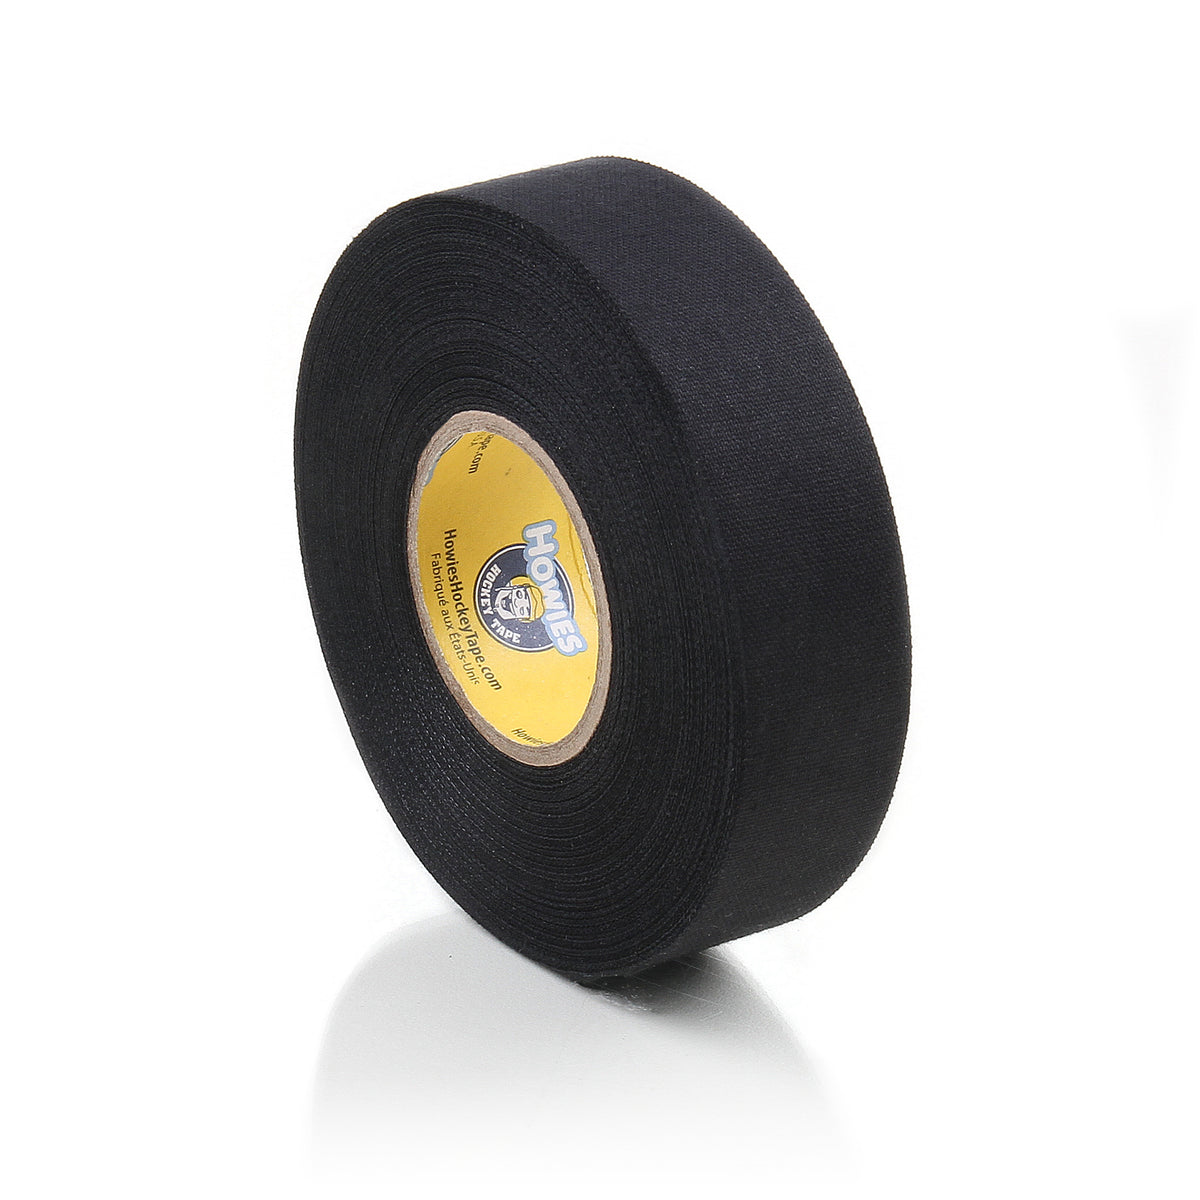 Howies Red Cloth Hockey Tape | Howies Hockey Tape